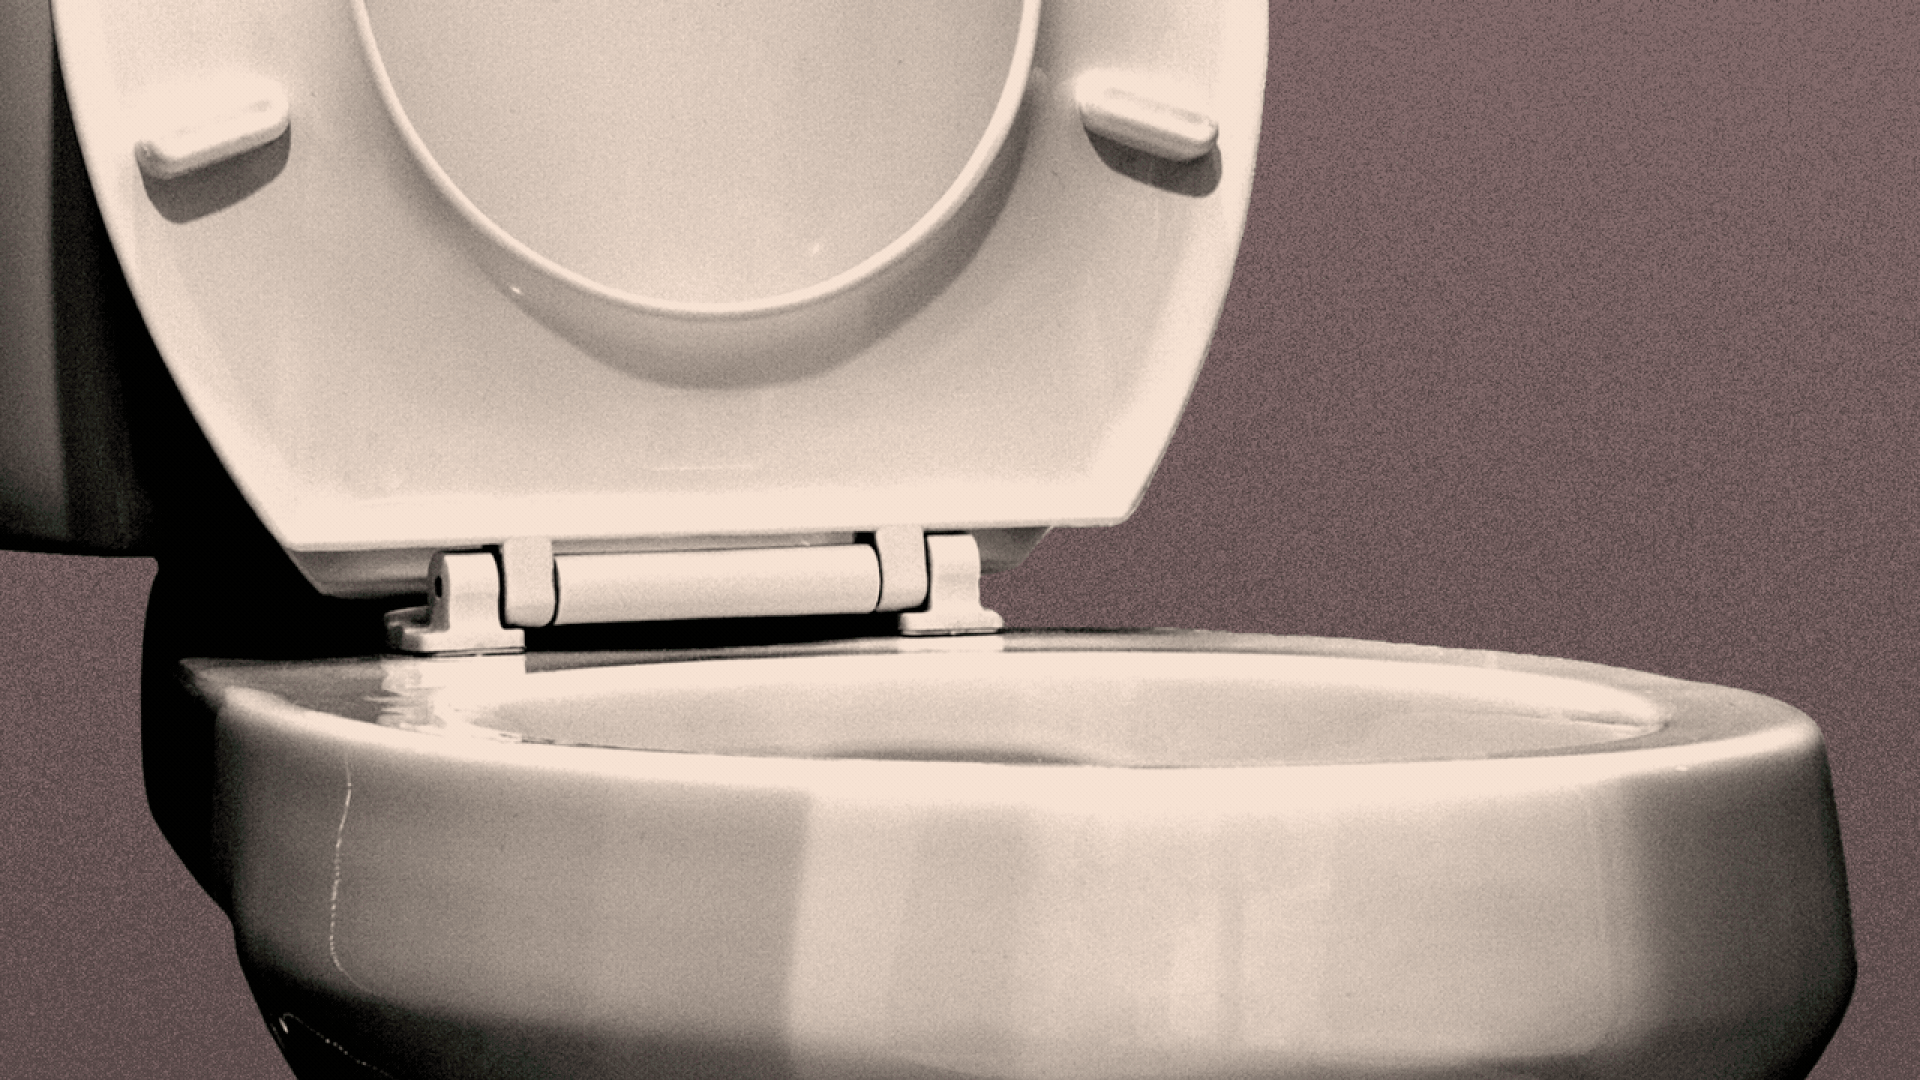 Squat with caution: Tips for avoiding Florida's toilet invaders